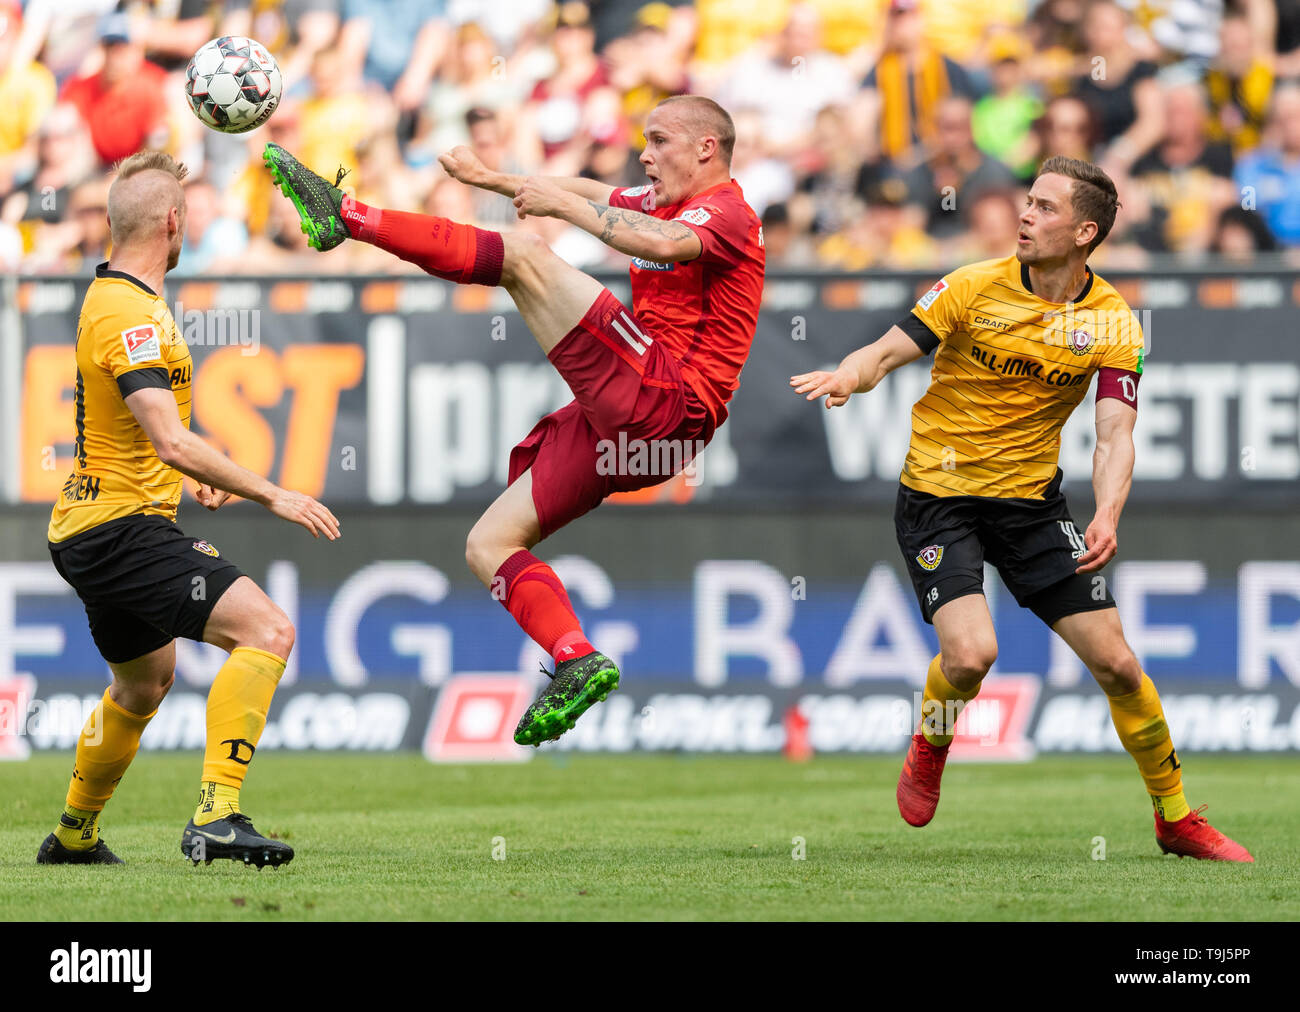 Dresden, Germany. 19th May, 2019. Soccer: 2nd Bundesliga, Dynamo Dresden - SC Paderborn 07, 34th matchday, in the Rudolf Harbig Stadium. Paderborn's Sven Michel (M) against Dynamos Brian Hamalainen (l) and Jannik Müller. Credit: Robert Michael/dpa-Zentralbild/dpa - IMPORTANT NOTE: It is prohibited to use or have used photographs taken in the stadium and/or the match in the form of sequence images and/or video-like photo sequences./dpa/Alamy Live News Credit: dpa picture alliance/Alamy Live News Stock Photo